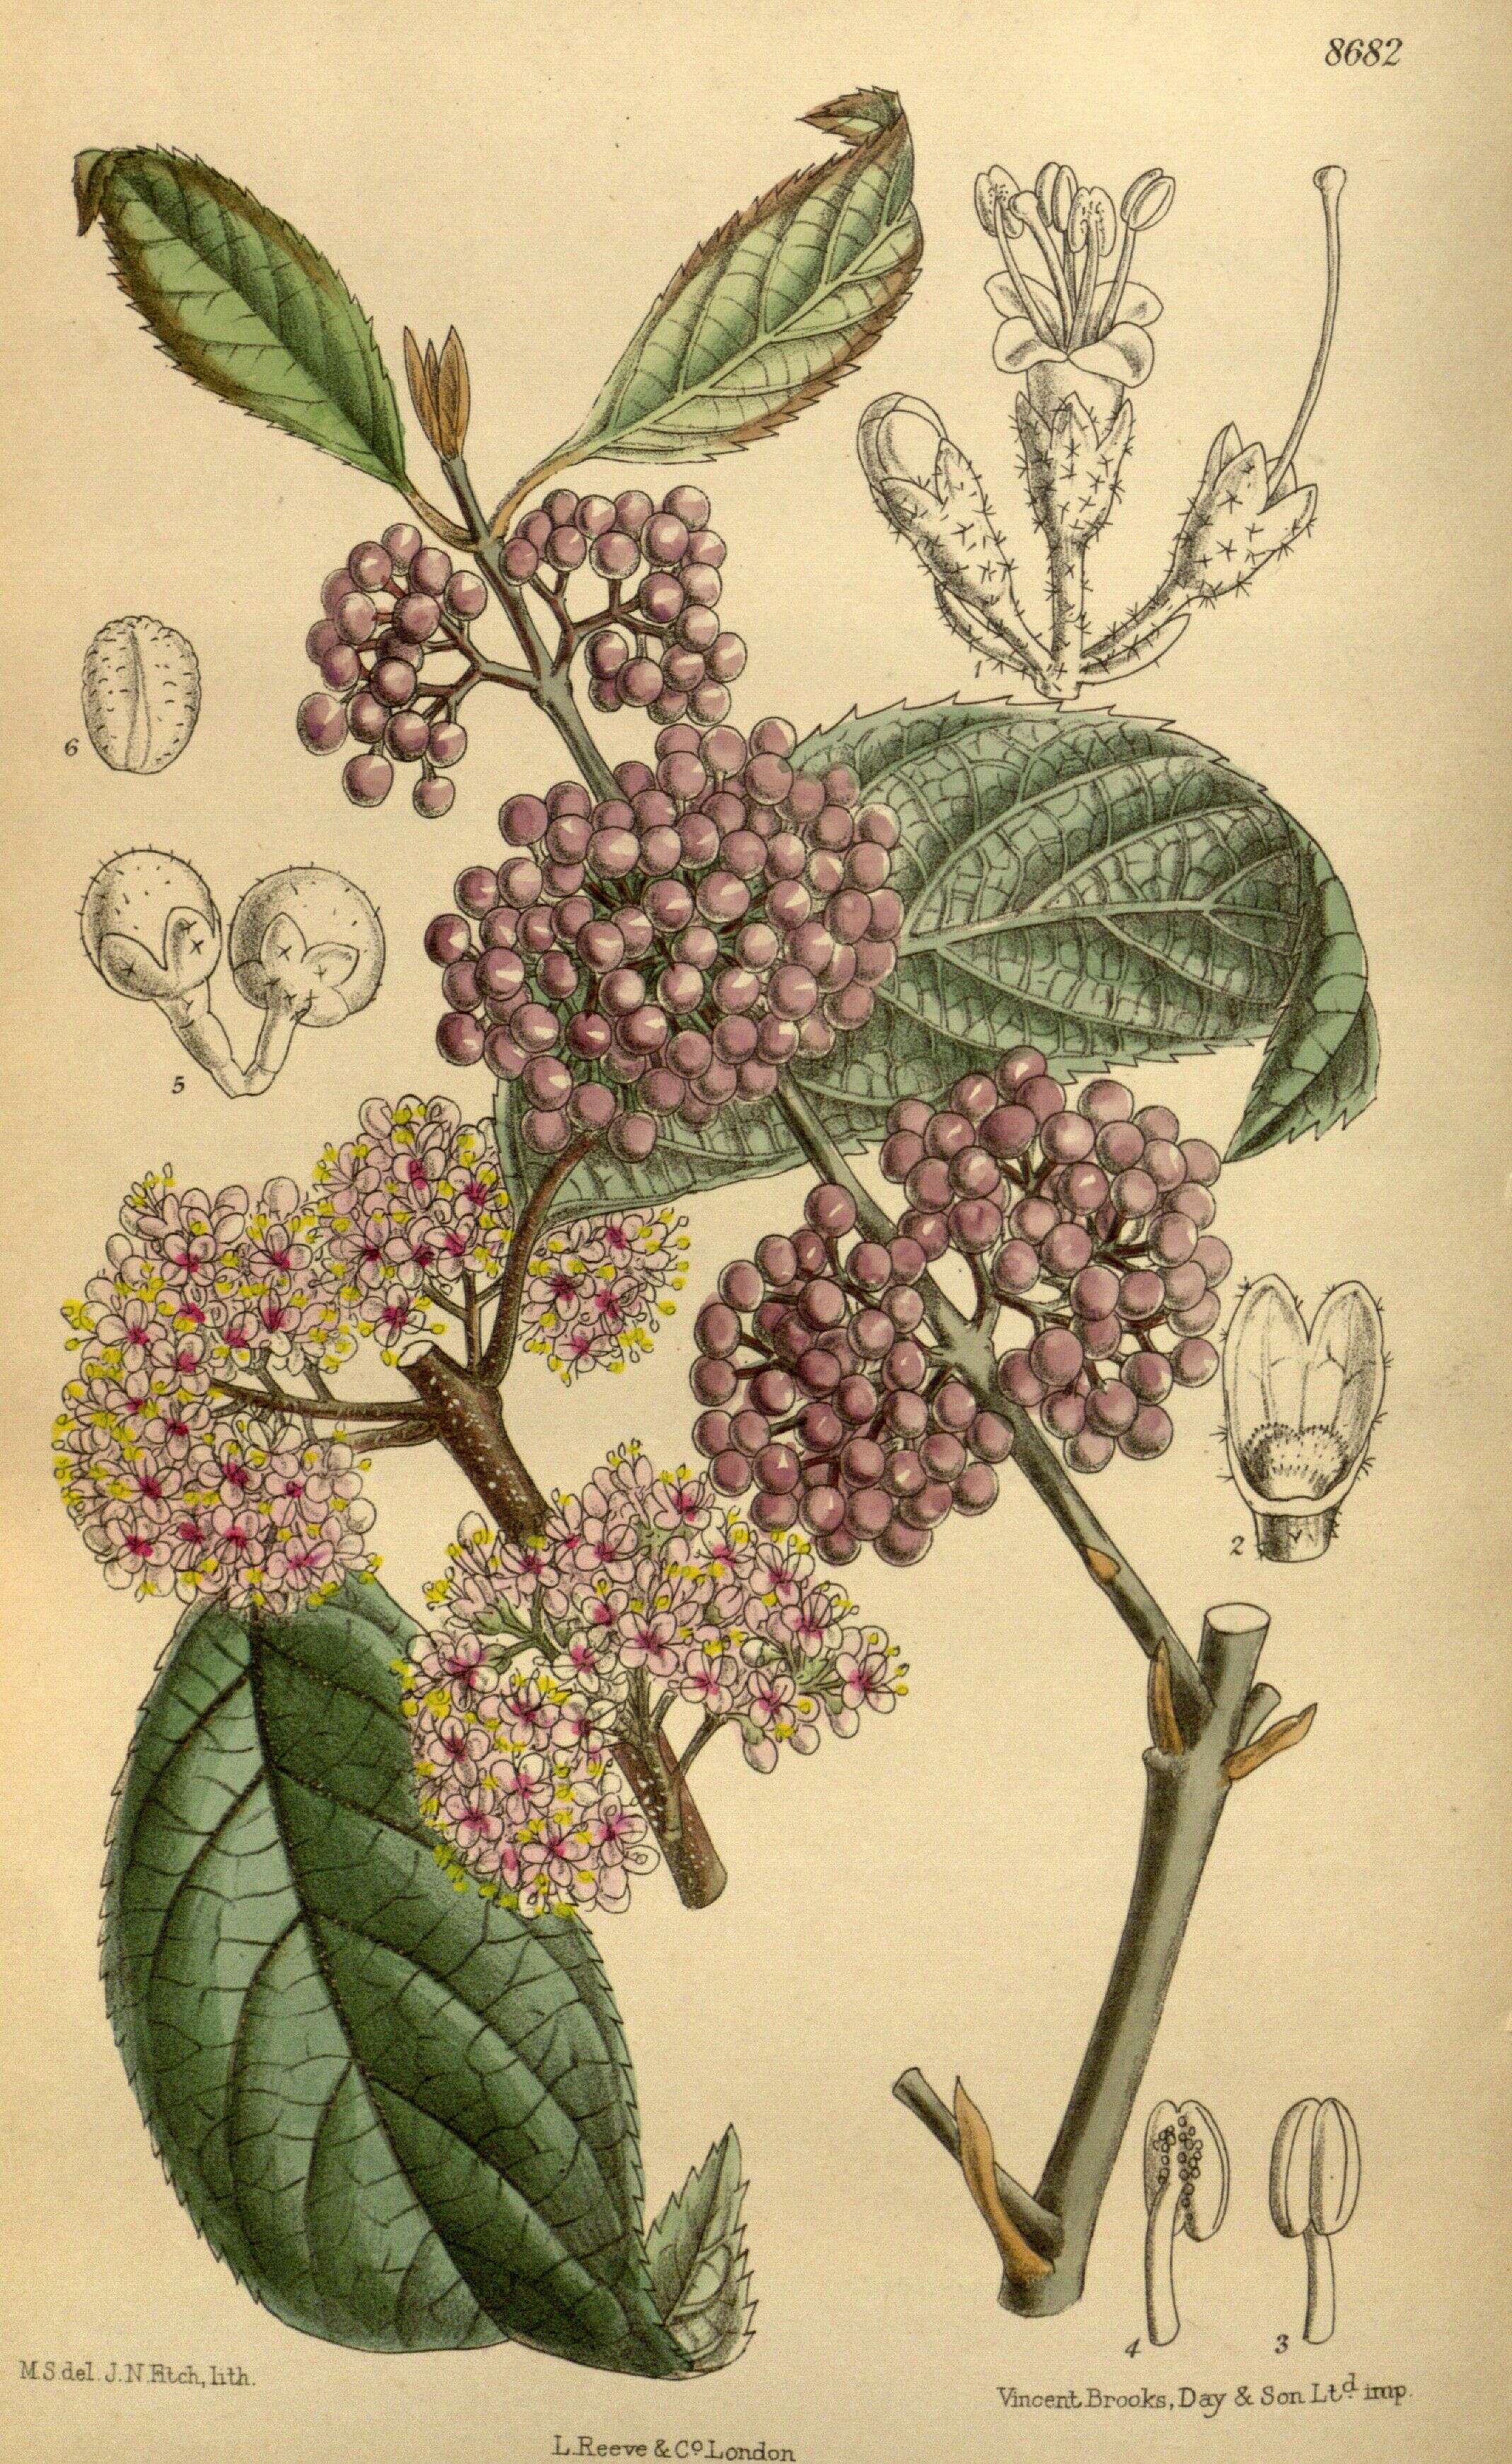 Image of Bodinier's beautyberry